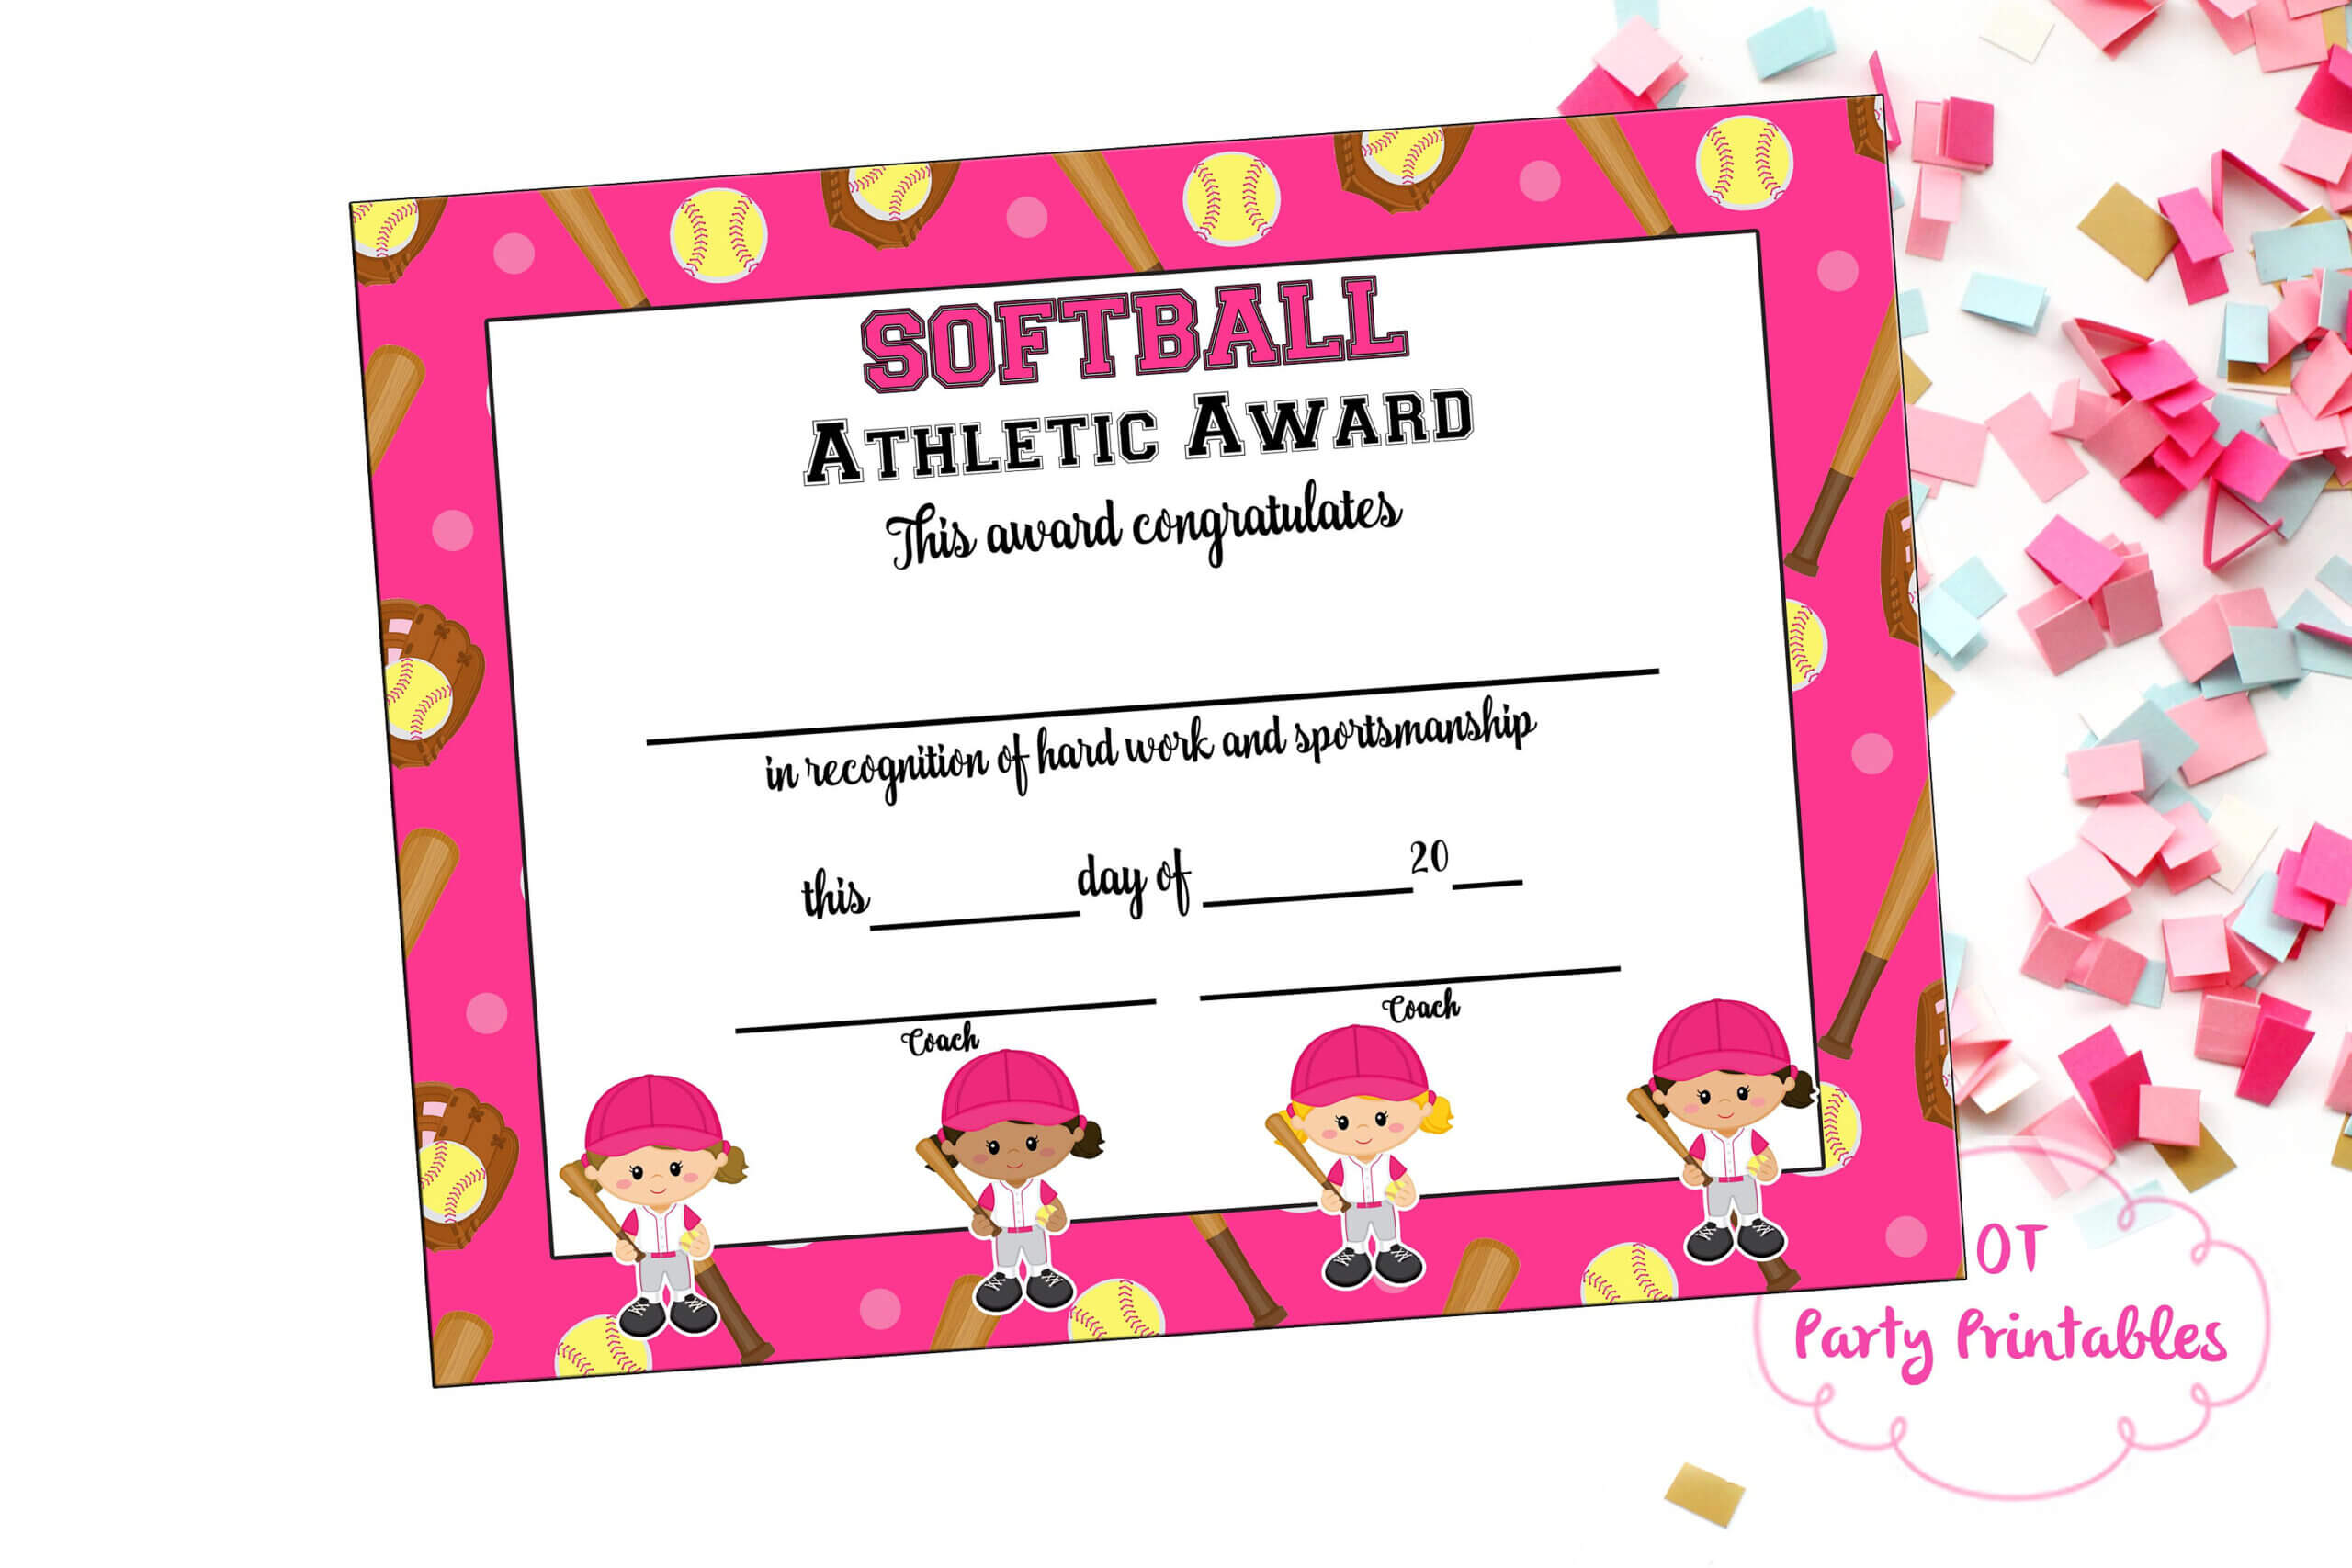 Softball Certificate Of Achievement - Softball Award - Print At Home -  Softball Mvp - Softball Certificate Of Completion - Sports Award Intended For Softball Award Certificate Template